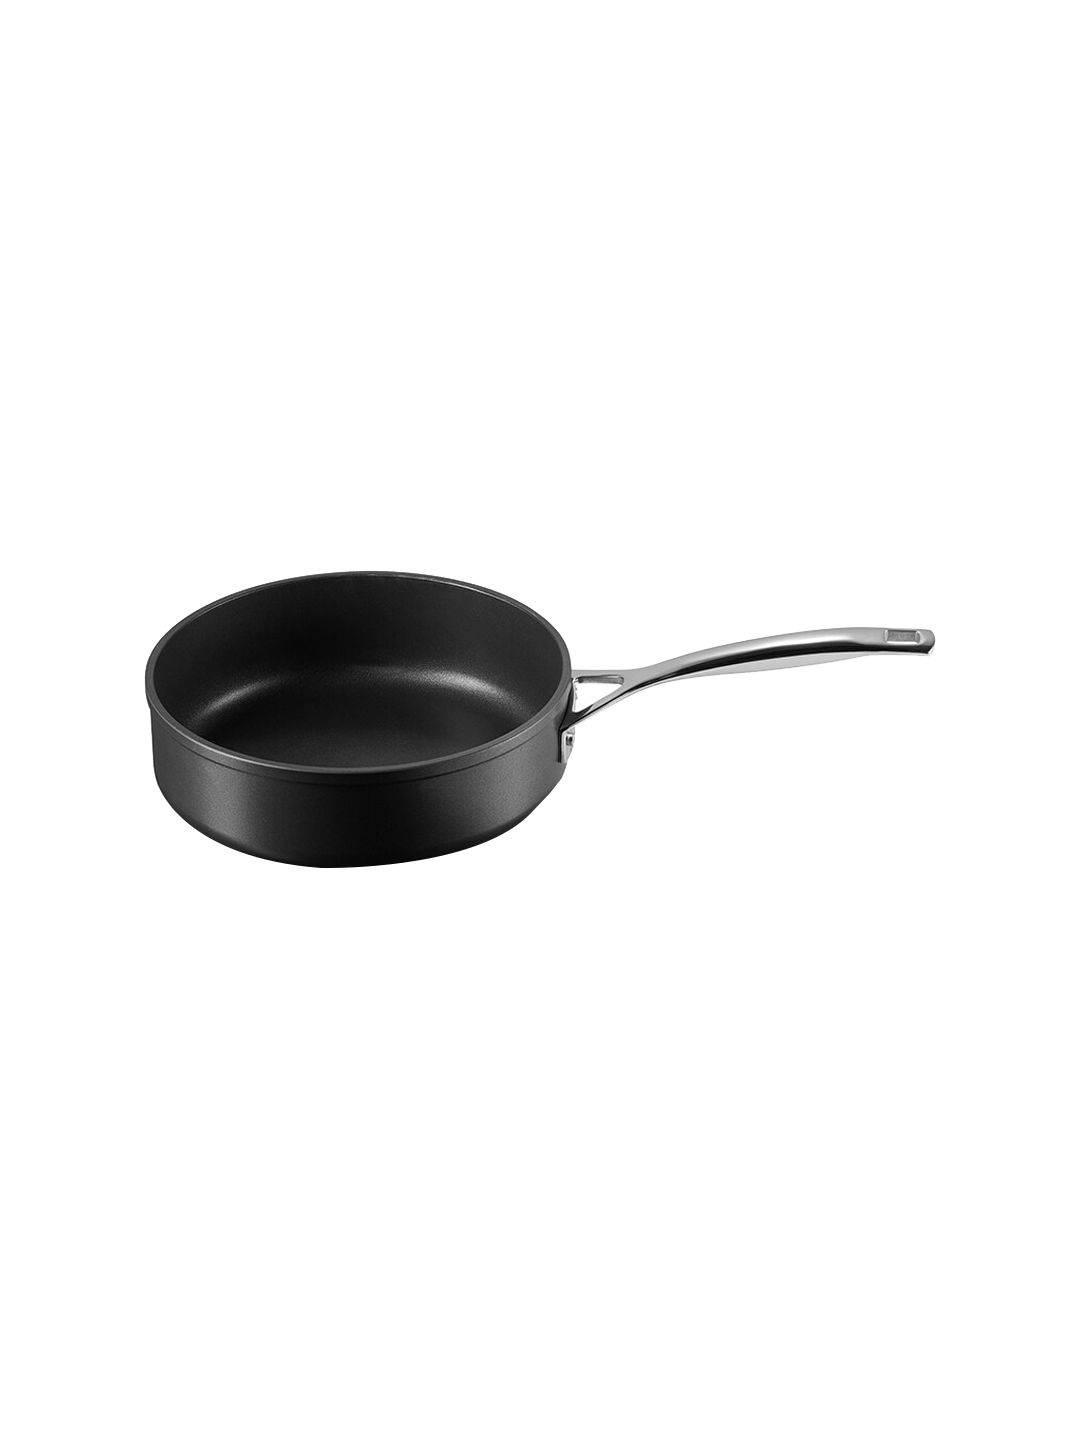 LE CREUSET Adults Black Solid Stainless Steel Saute Pan 24 cm Price in India